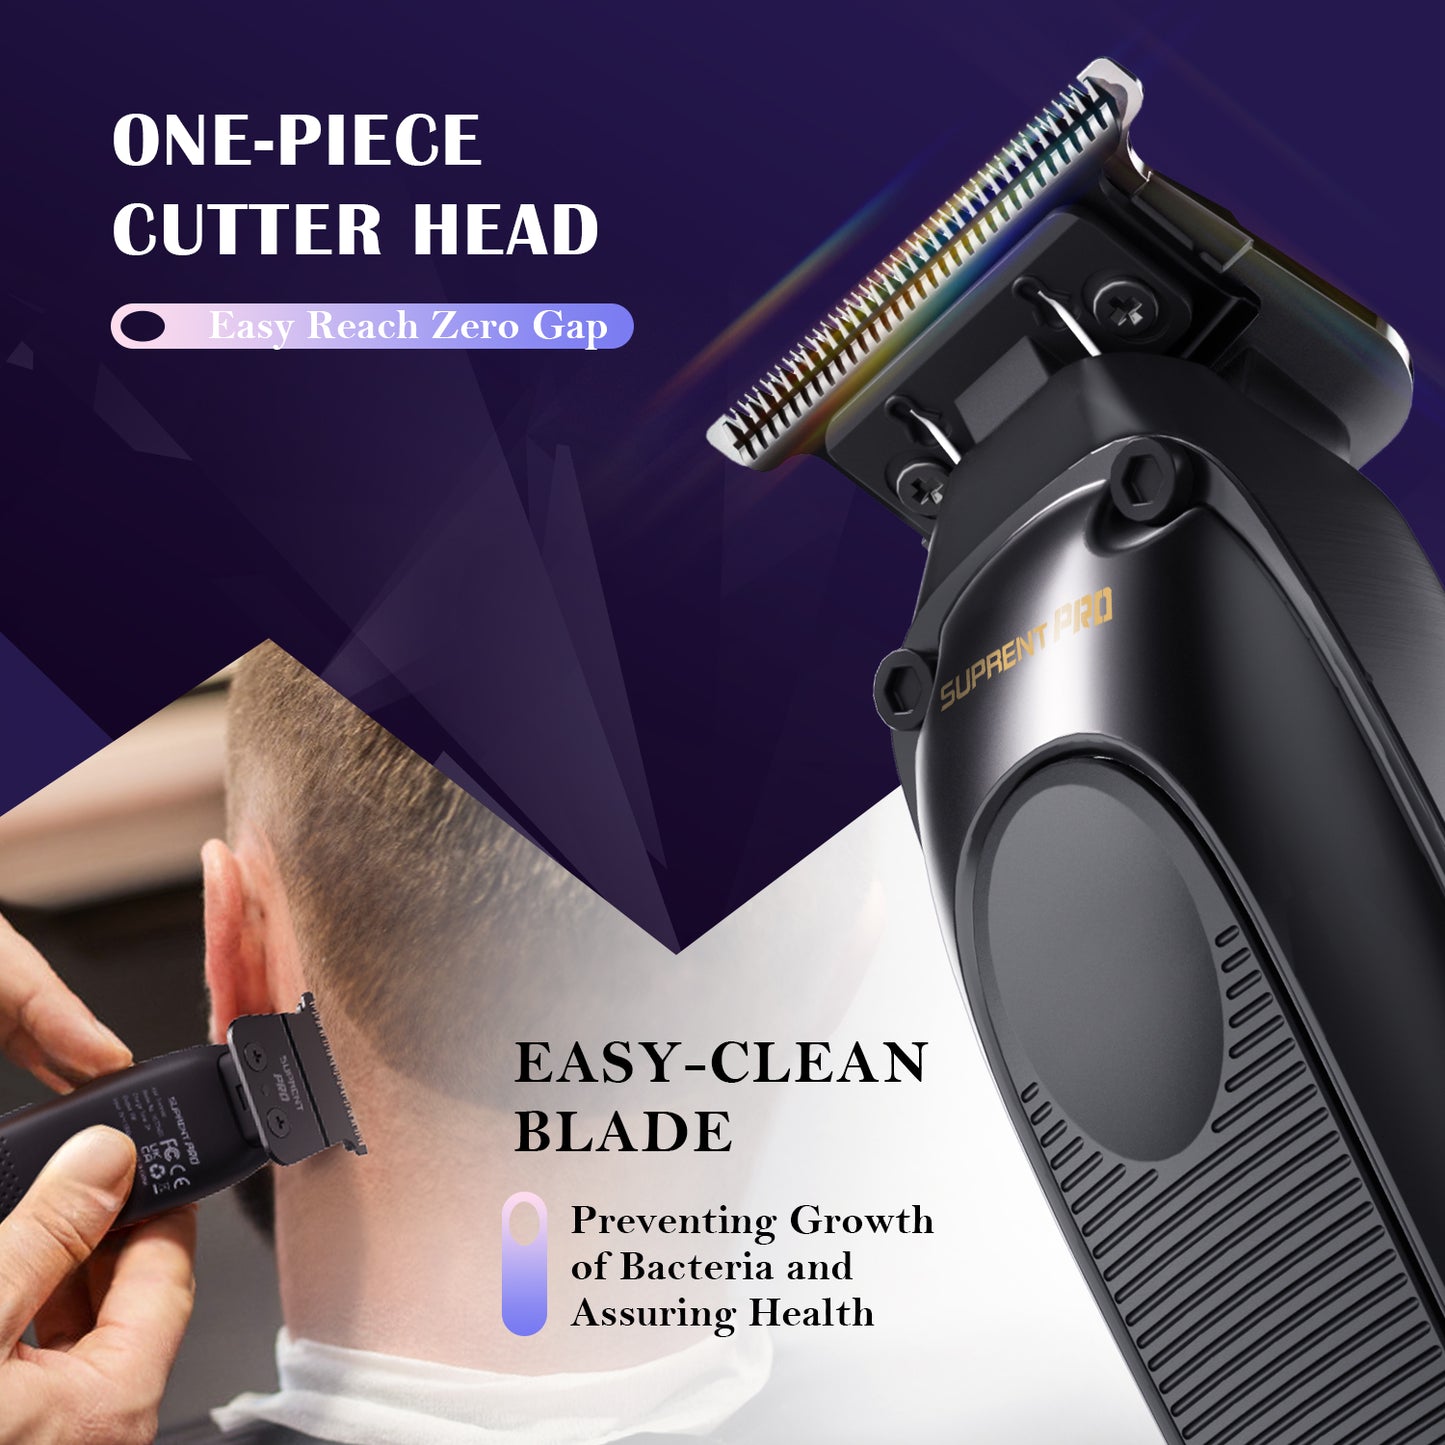 The Black Obsidian-T Professional Trimmer - FT775BX